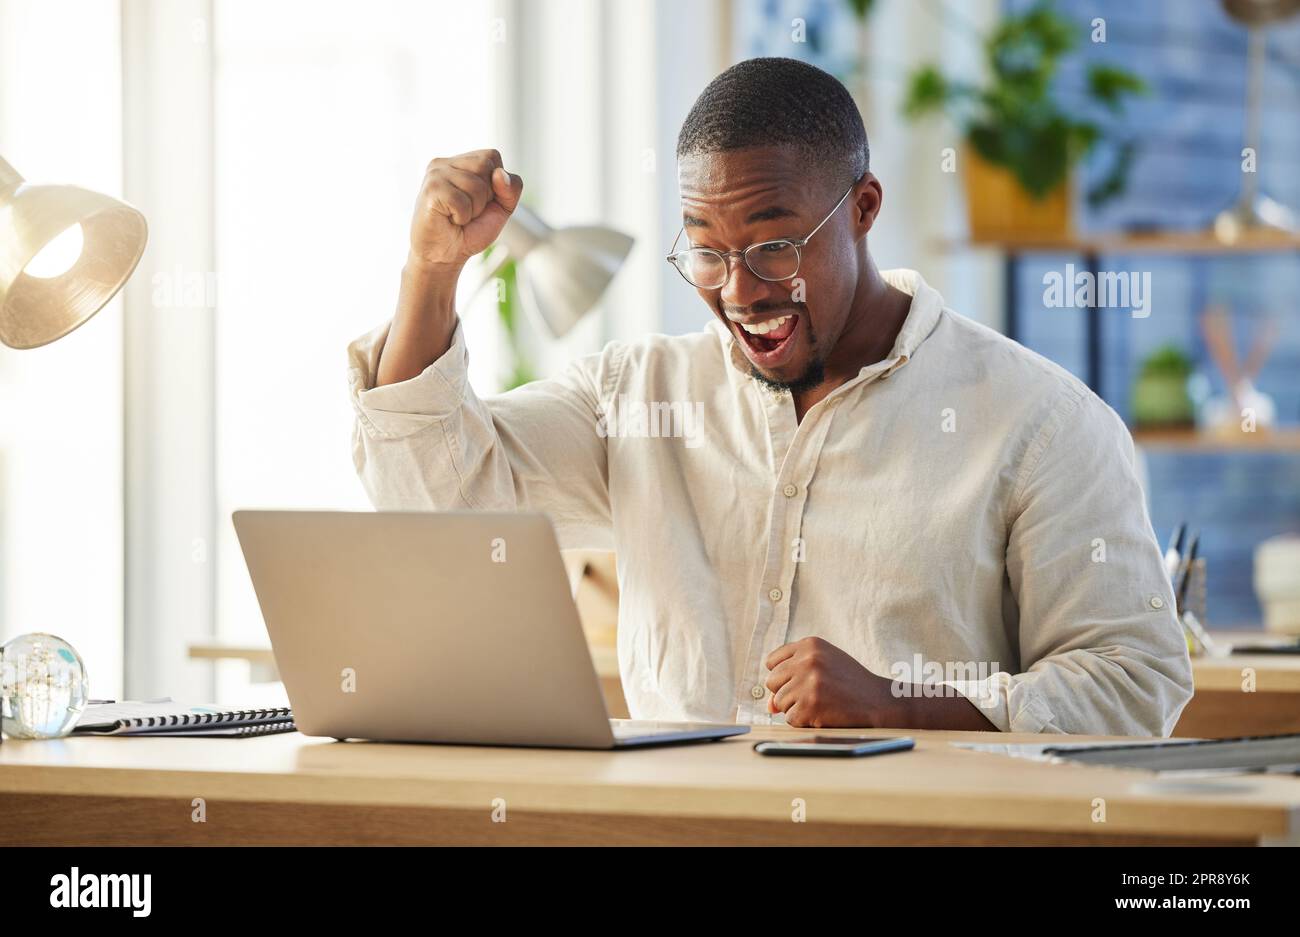 He never thought it would happen. a young businessman cheering in excitement at his desk. Stock Photo